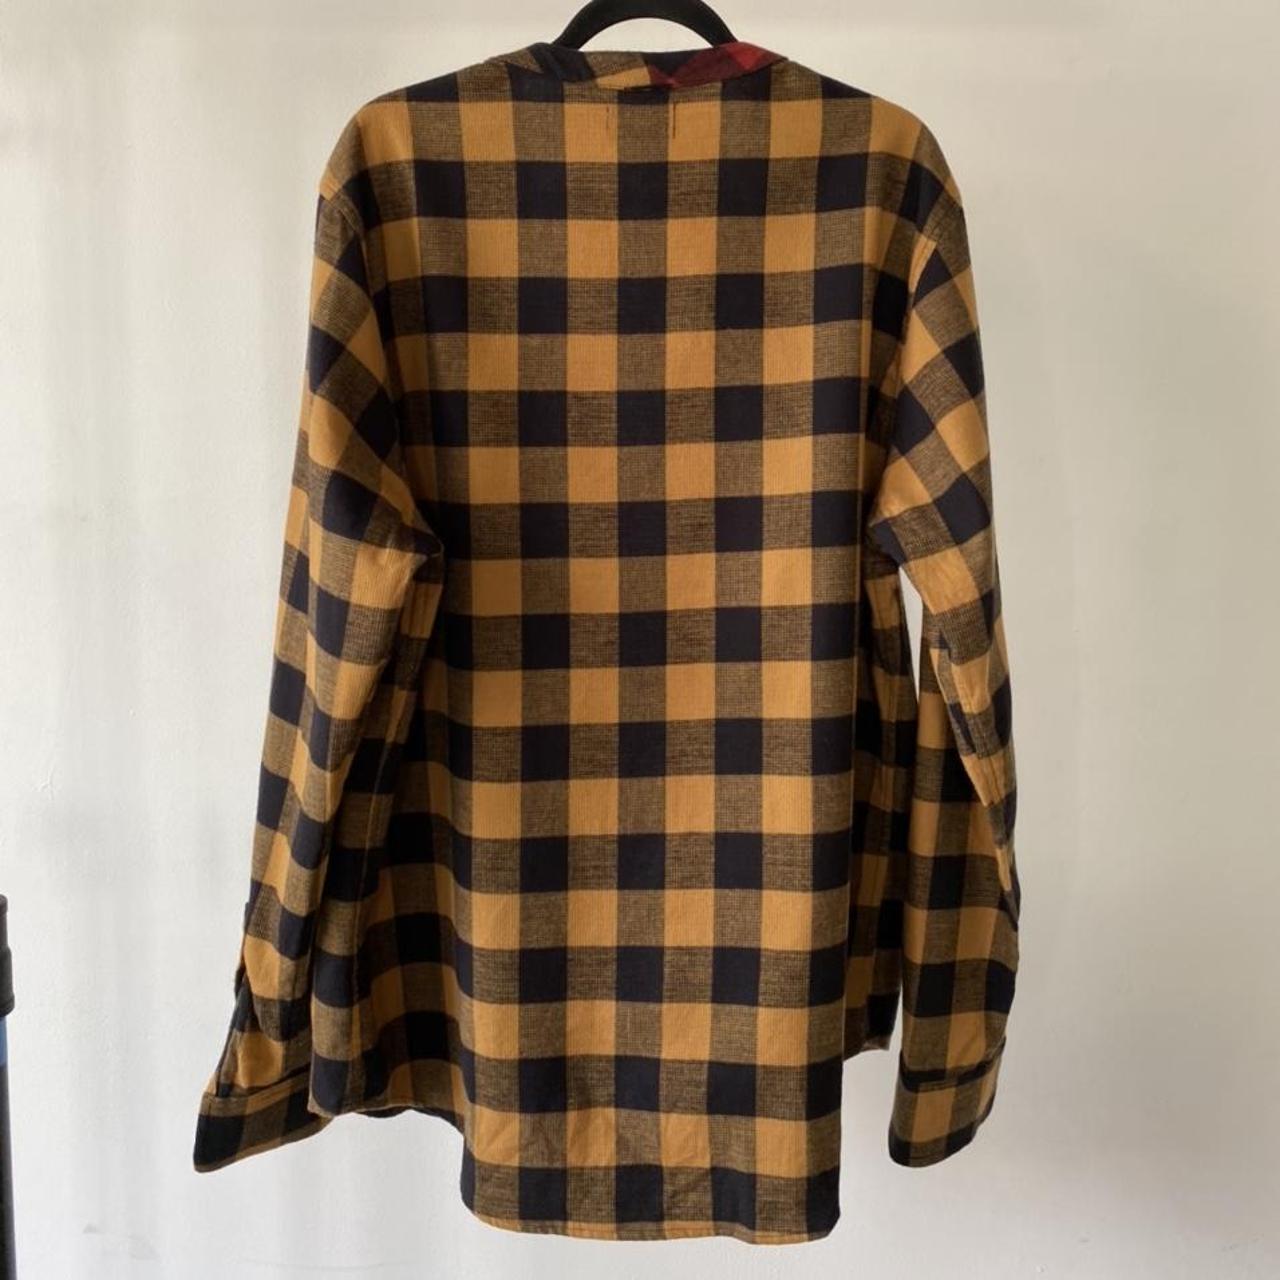 Product Image 2 - Plaid flannel kimono with red